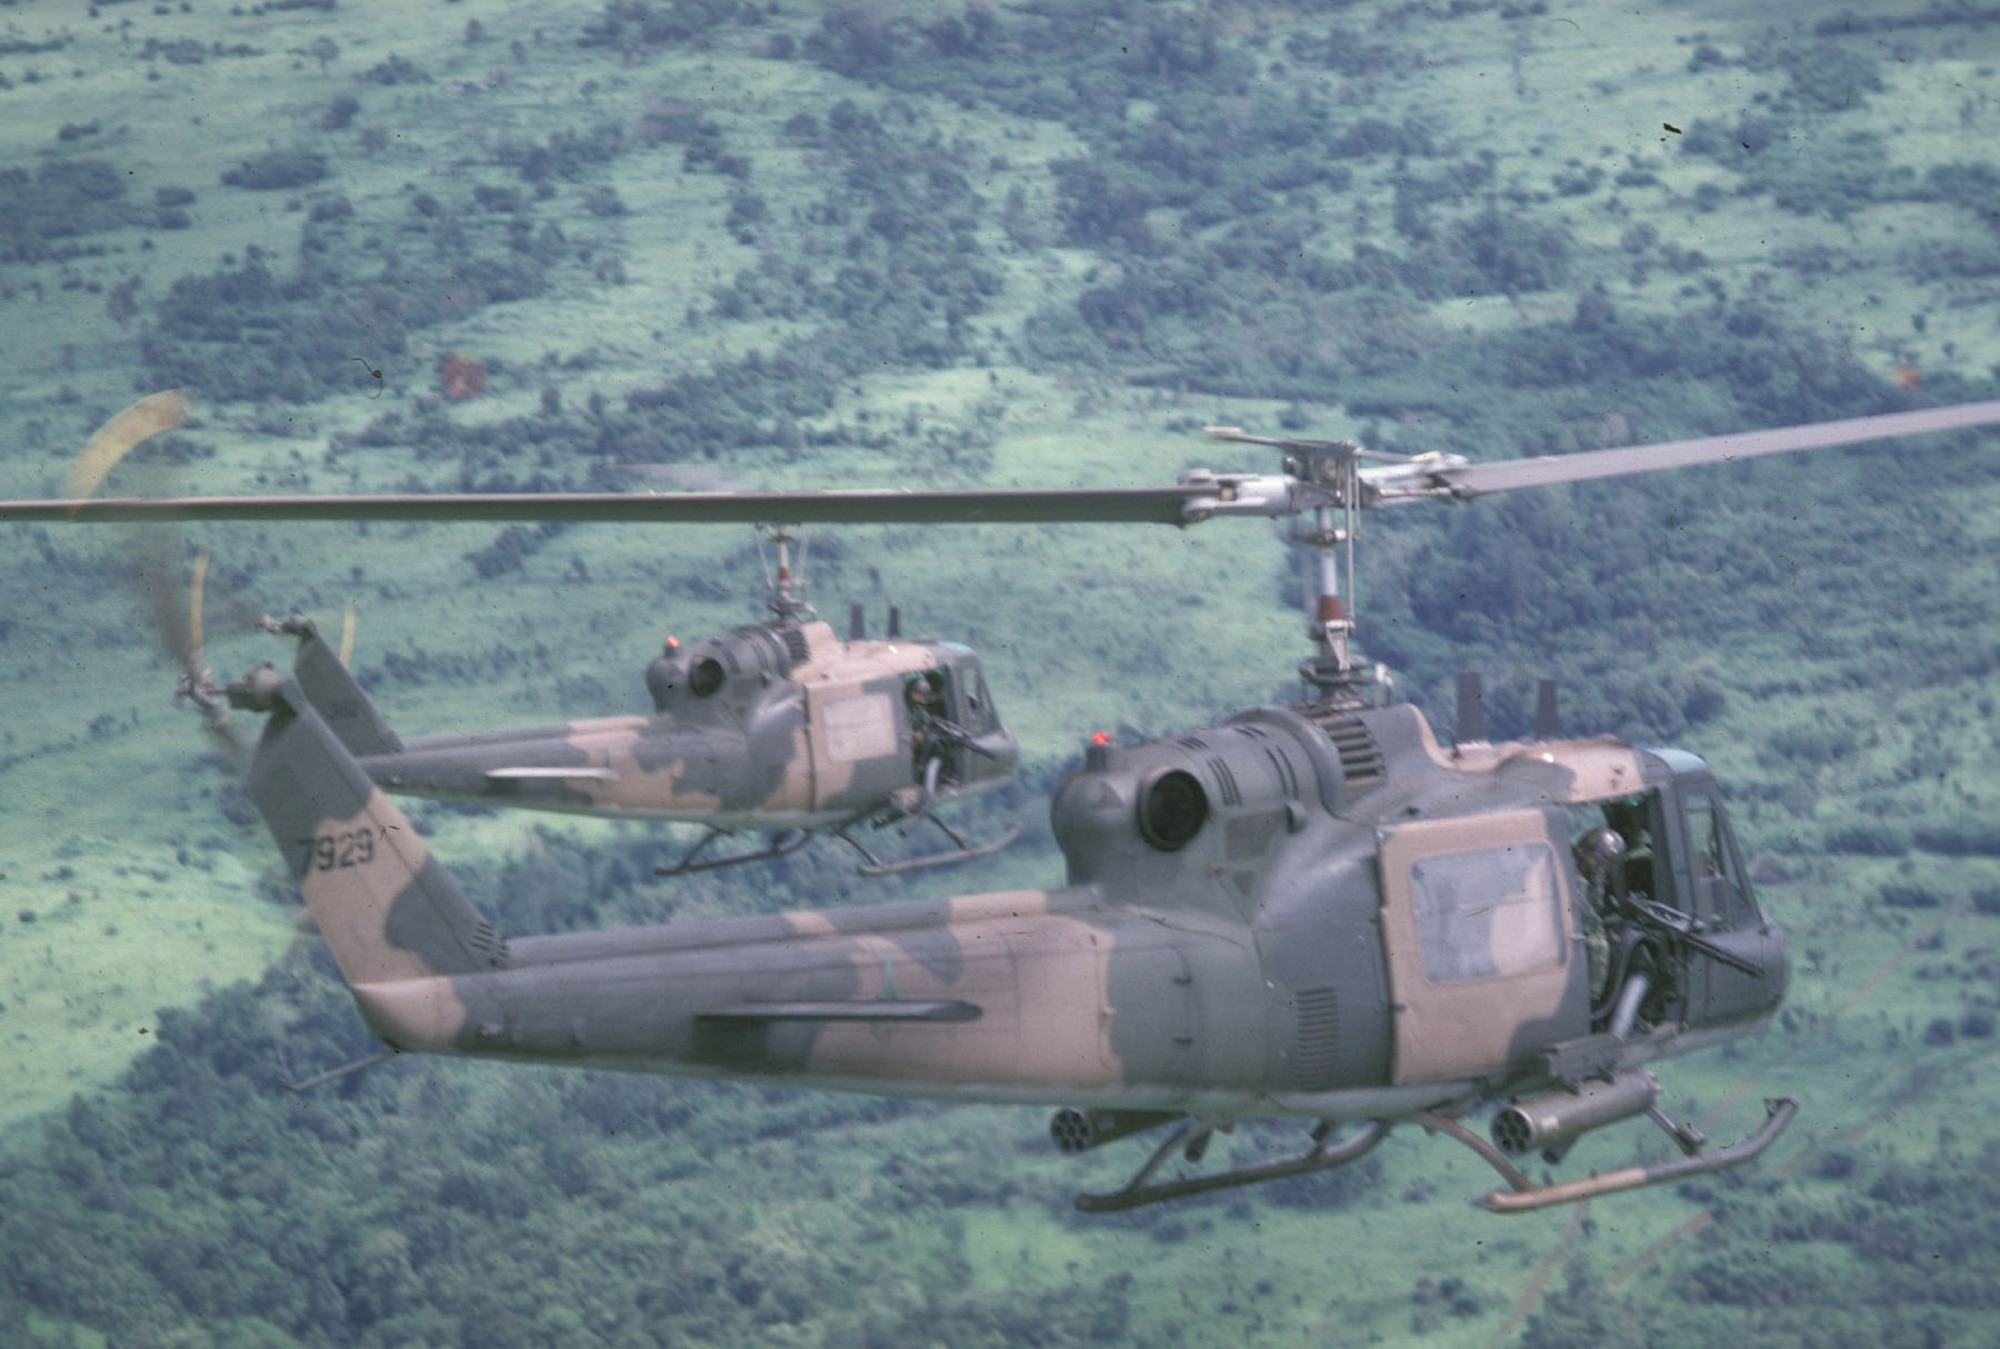 USAF helicopters inserted special operations teams into Cambodia. (U.S. Air Force photo)